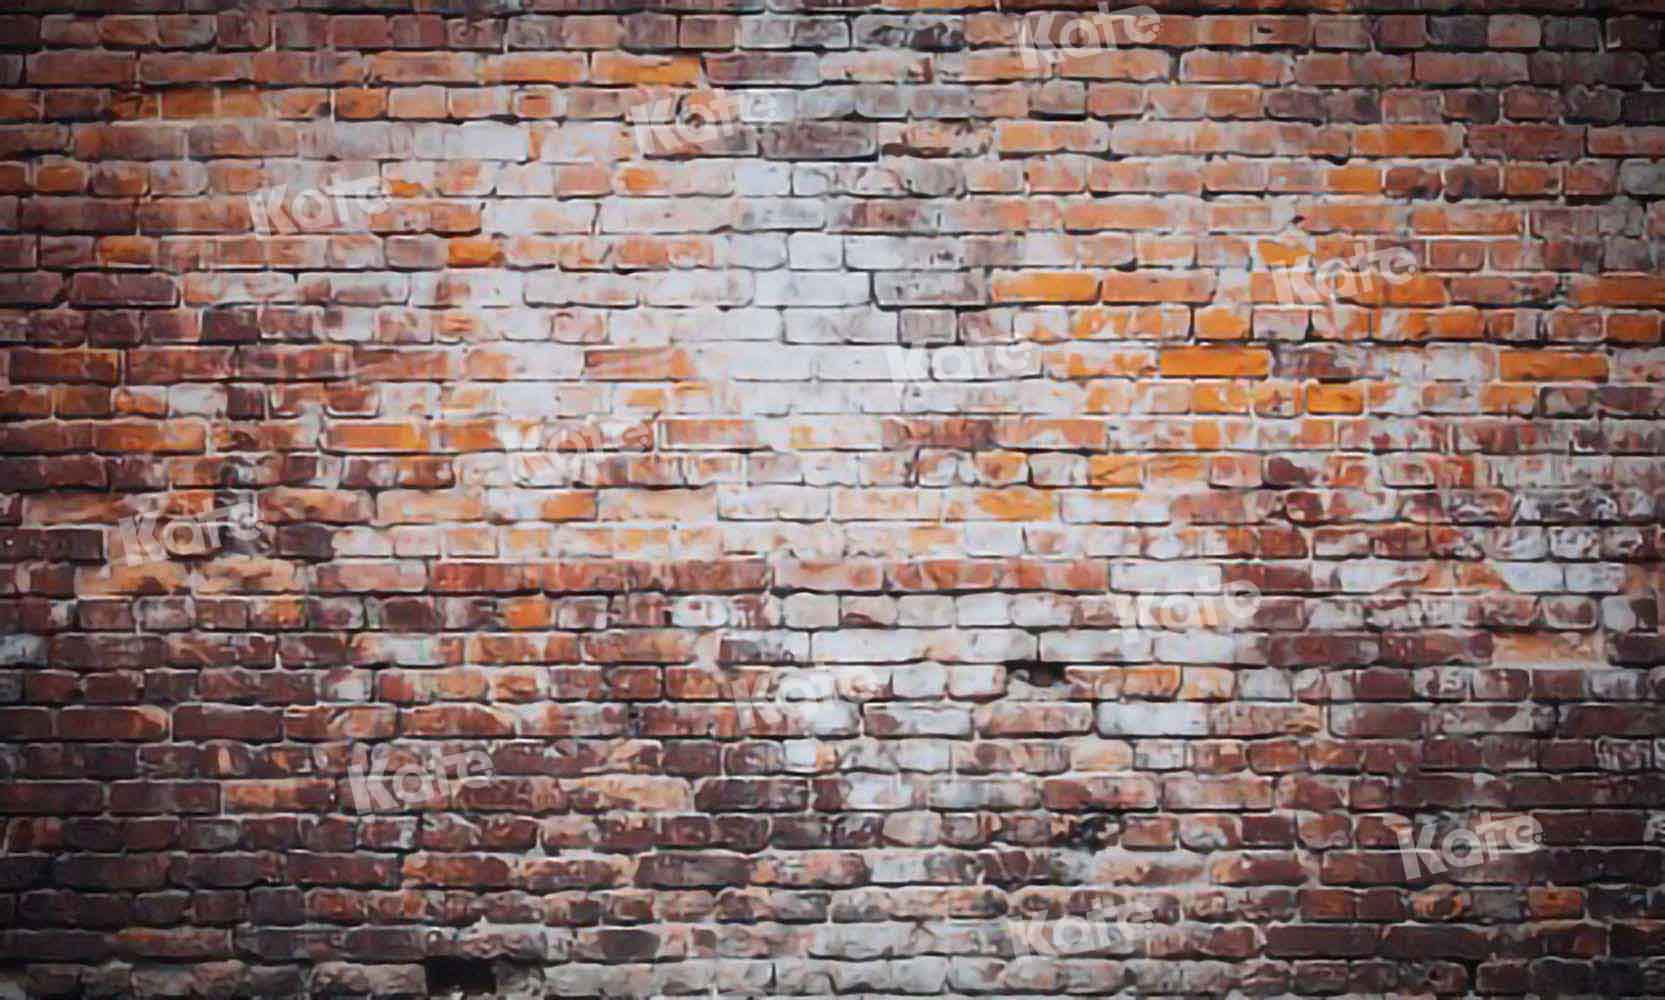 Kate Retro Old Brick Background for Photography Designed by Chain Photography